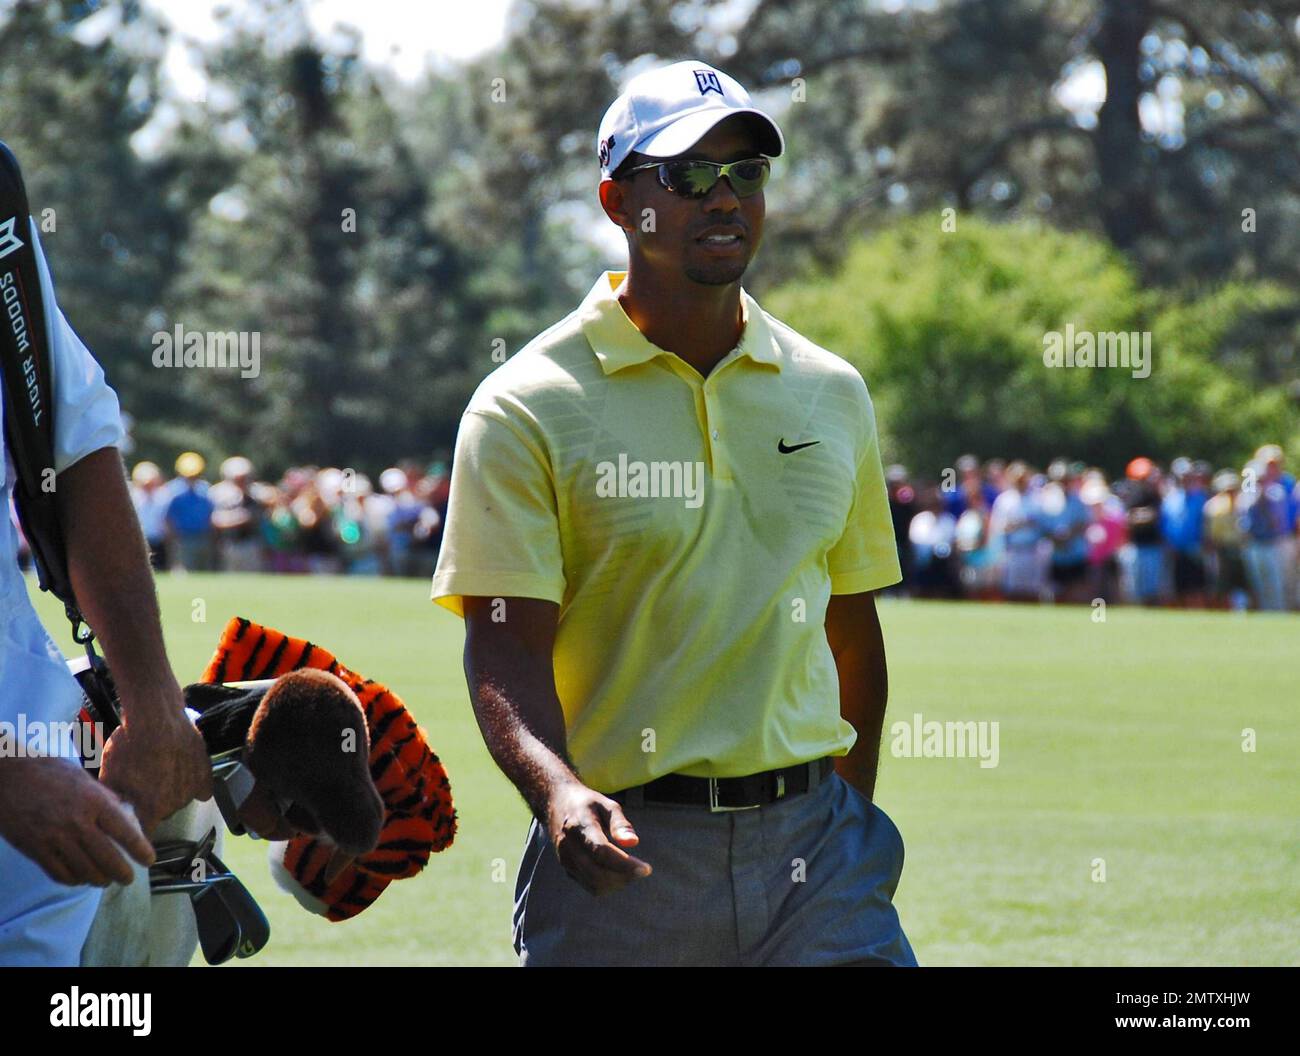 Tiger Woods on the golf course taking time for a practice run during the 2010 Masters Golf Tournament.  This marks Tiger's first time playing golf publicly since news broke about his extramarital affairs in November 2009. Augusta, GA. 04/06/10.   . Stock Photo